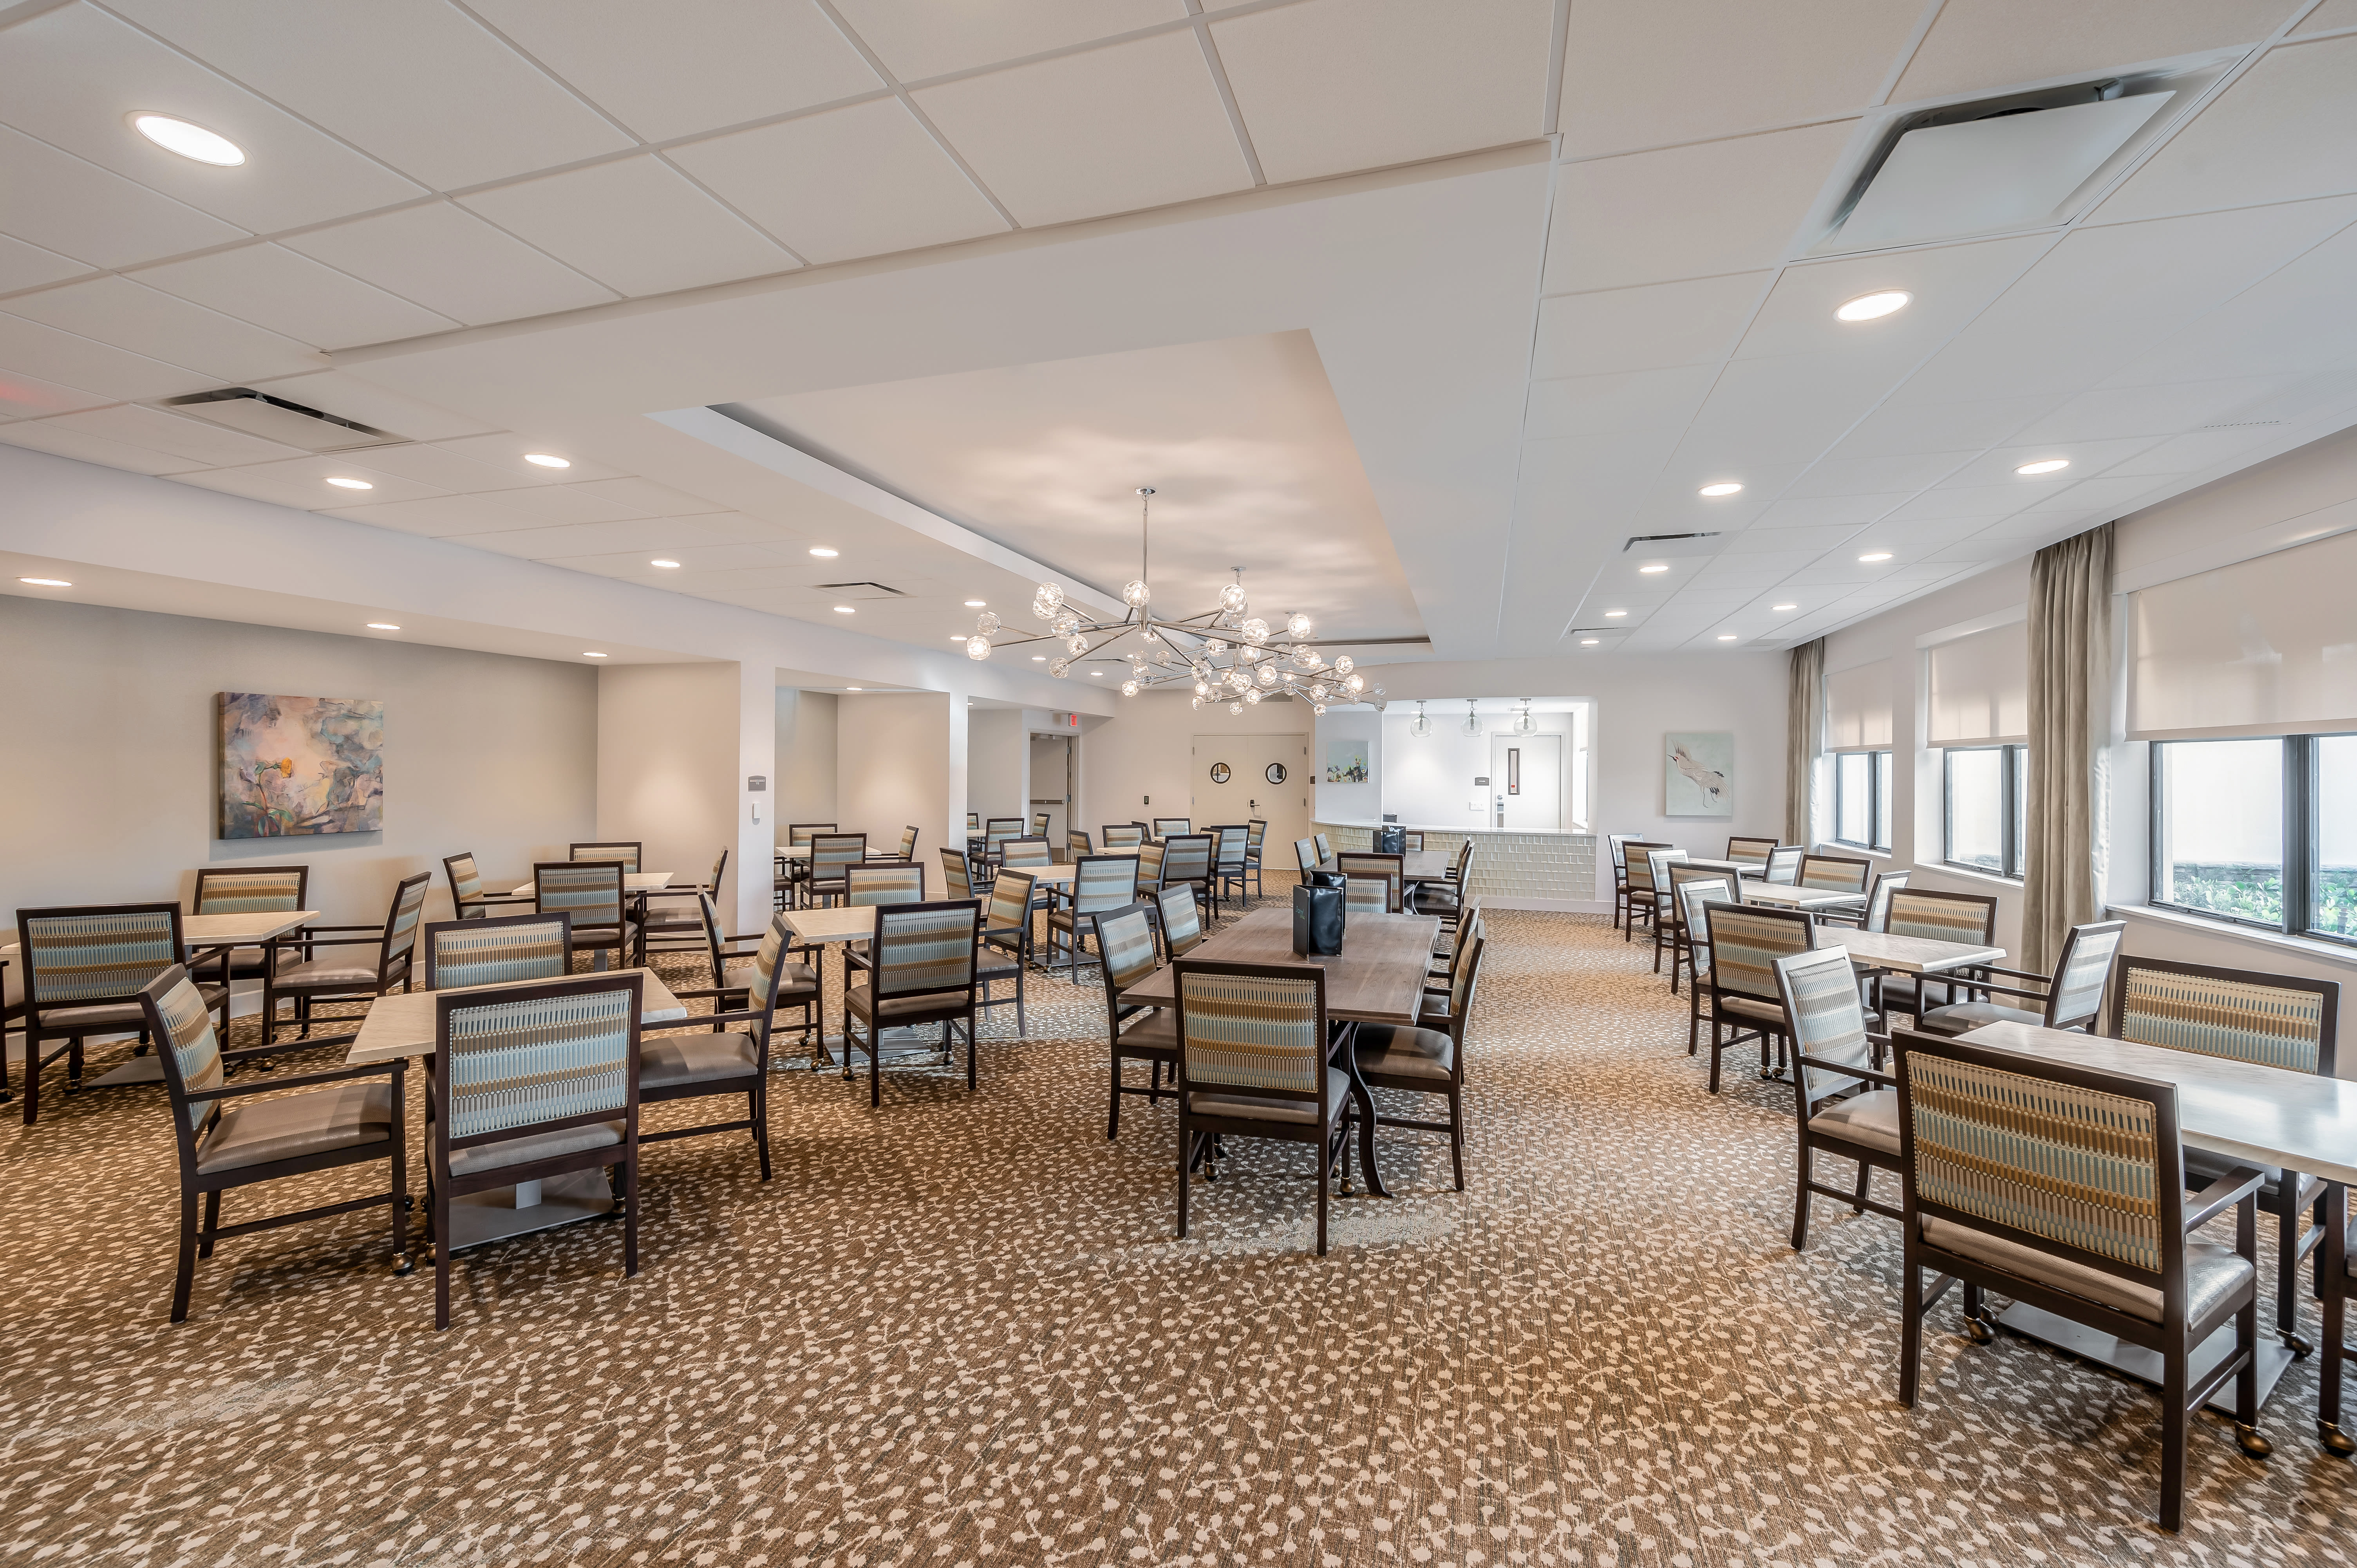 Learn about our dining program at Alura By Inspired Living in Rockledge, Florida